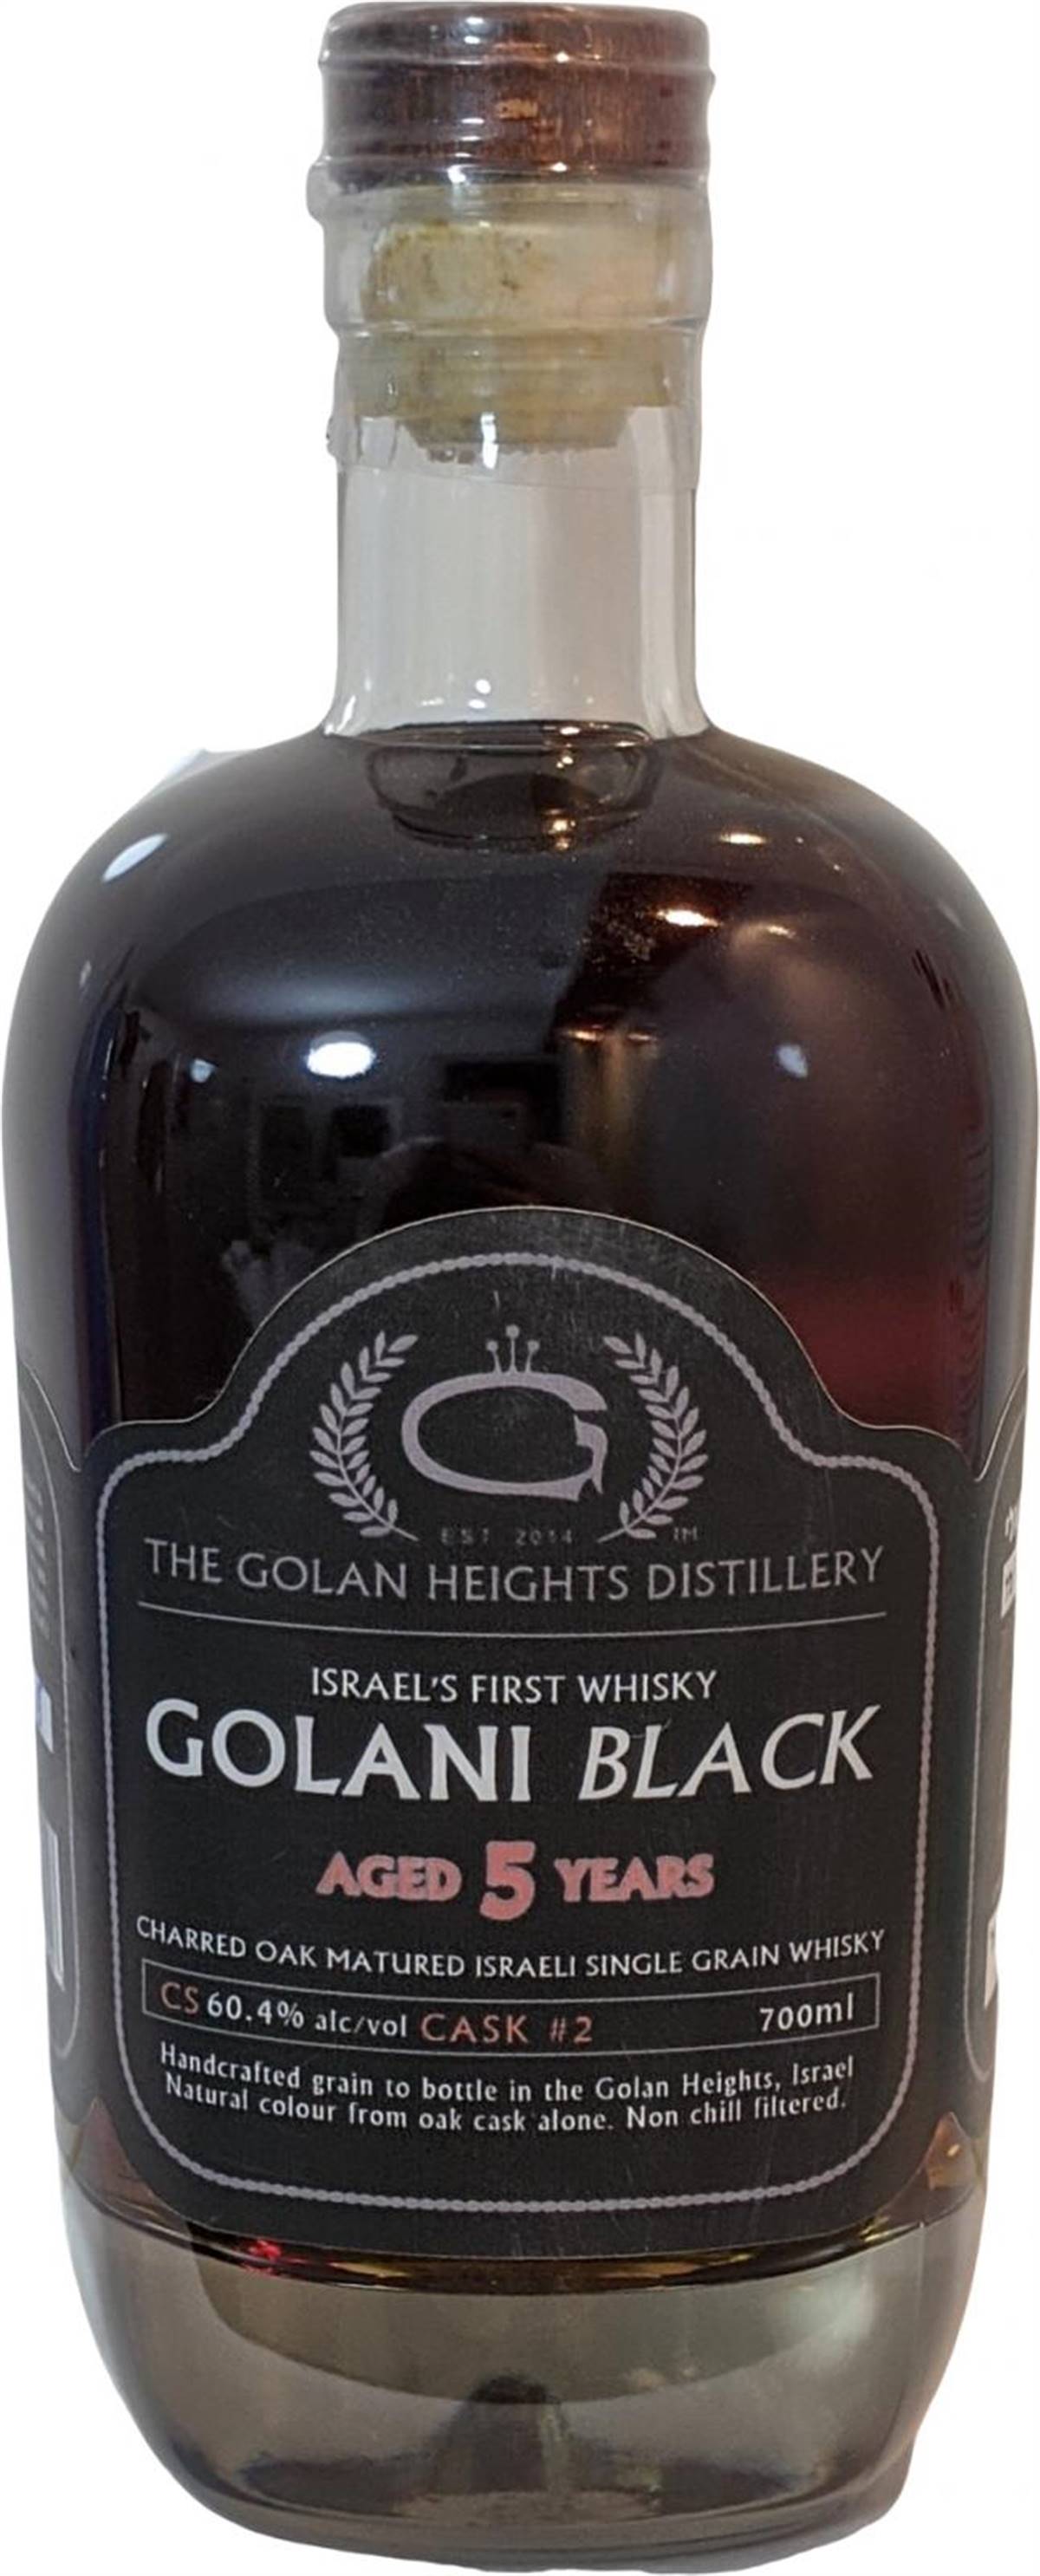 Golani Black 5 Years Cask Strenght